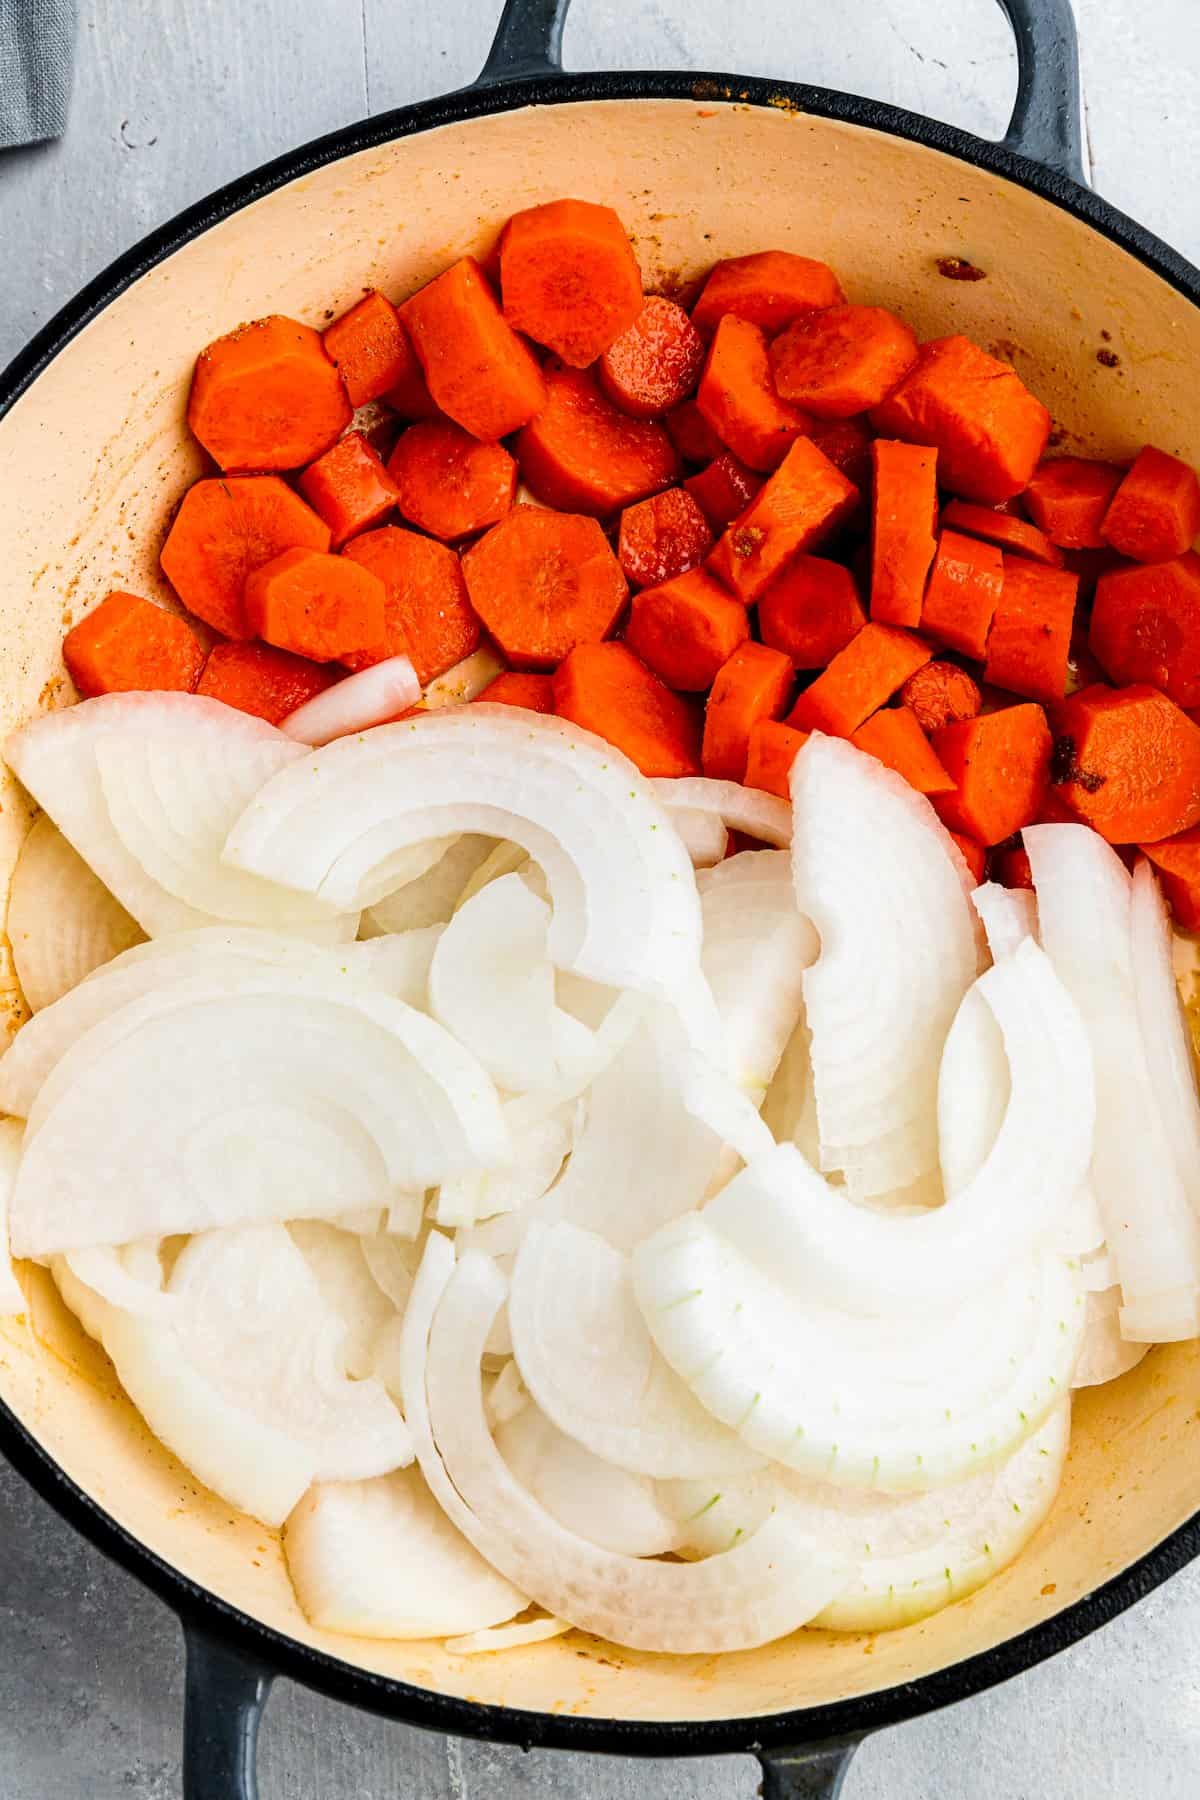 Sliced Onions and Chopped Carrots in a Large Pot with Handles